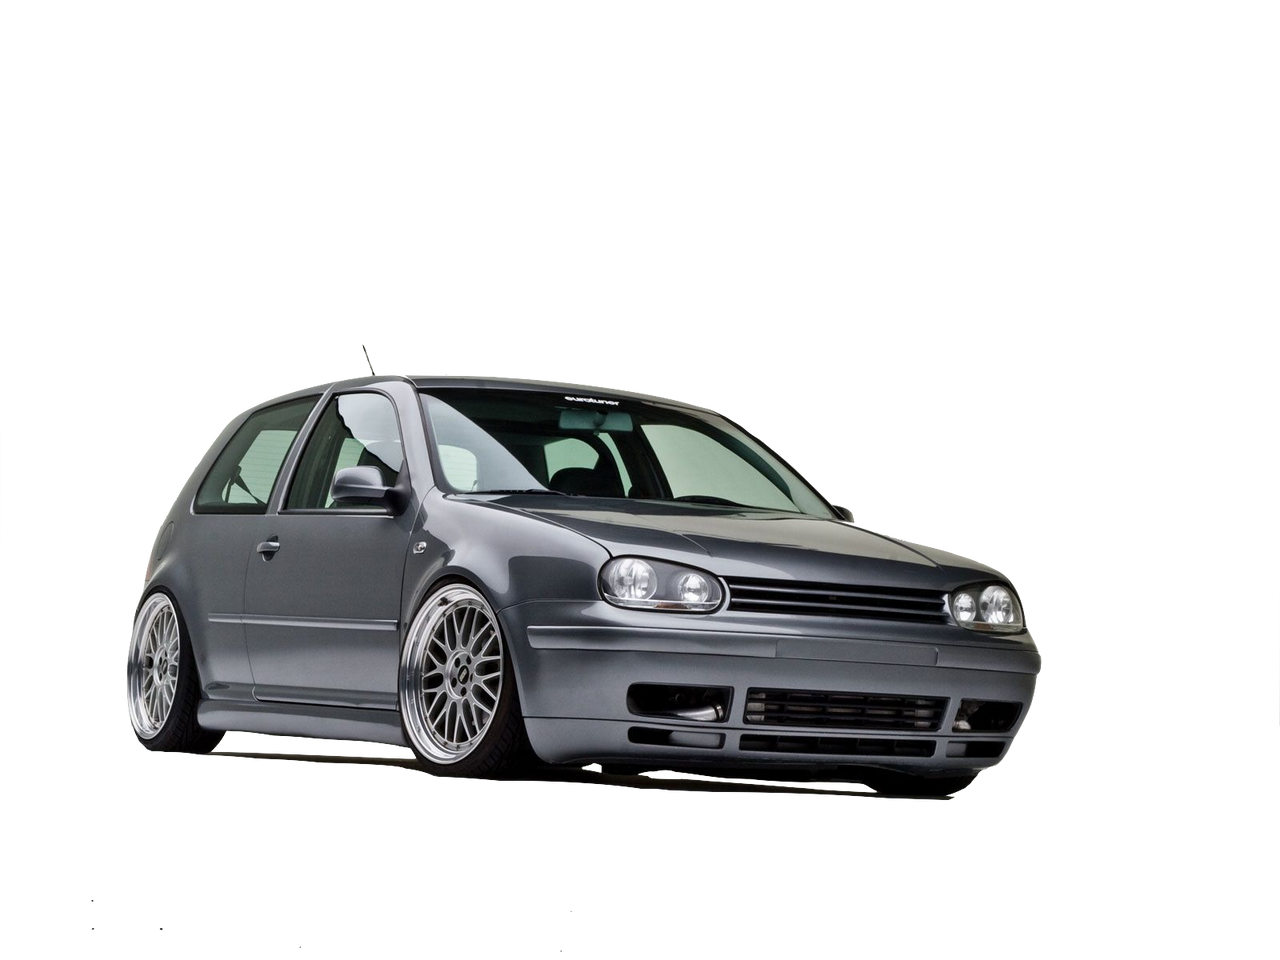 VW Golf IV - car tuning 01 Photograph by Hotte Hue - Pixels